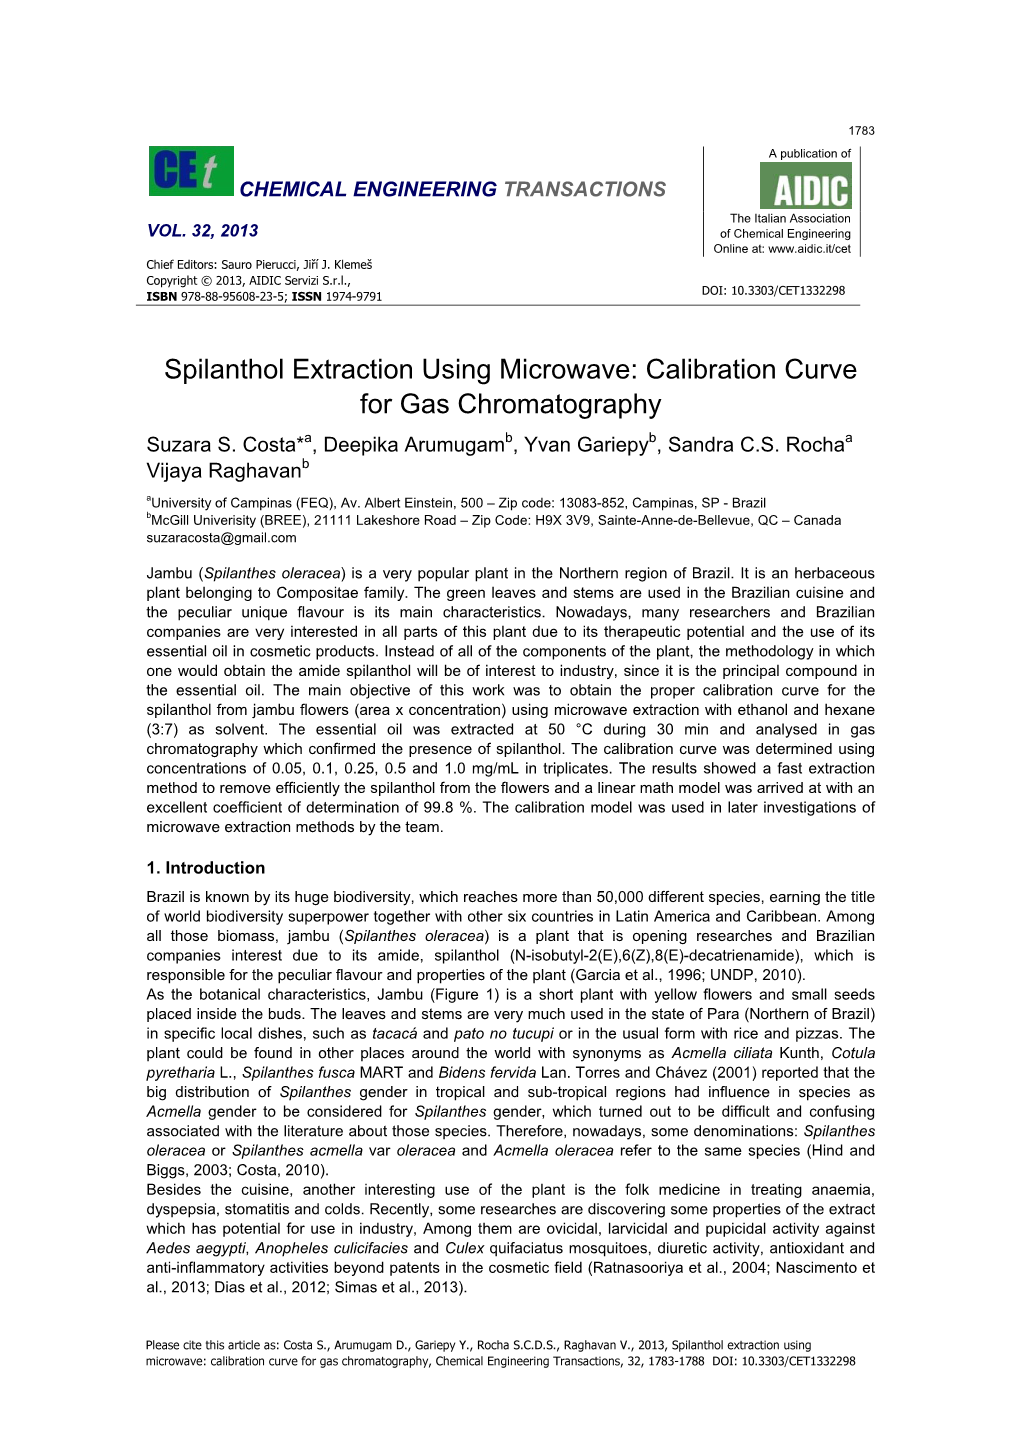 Spilanthol Extraction Using Microwave: Calibration Curve for Gas Chromatography Suzara S